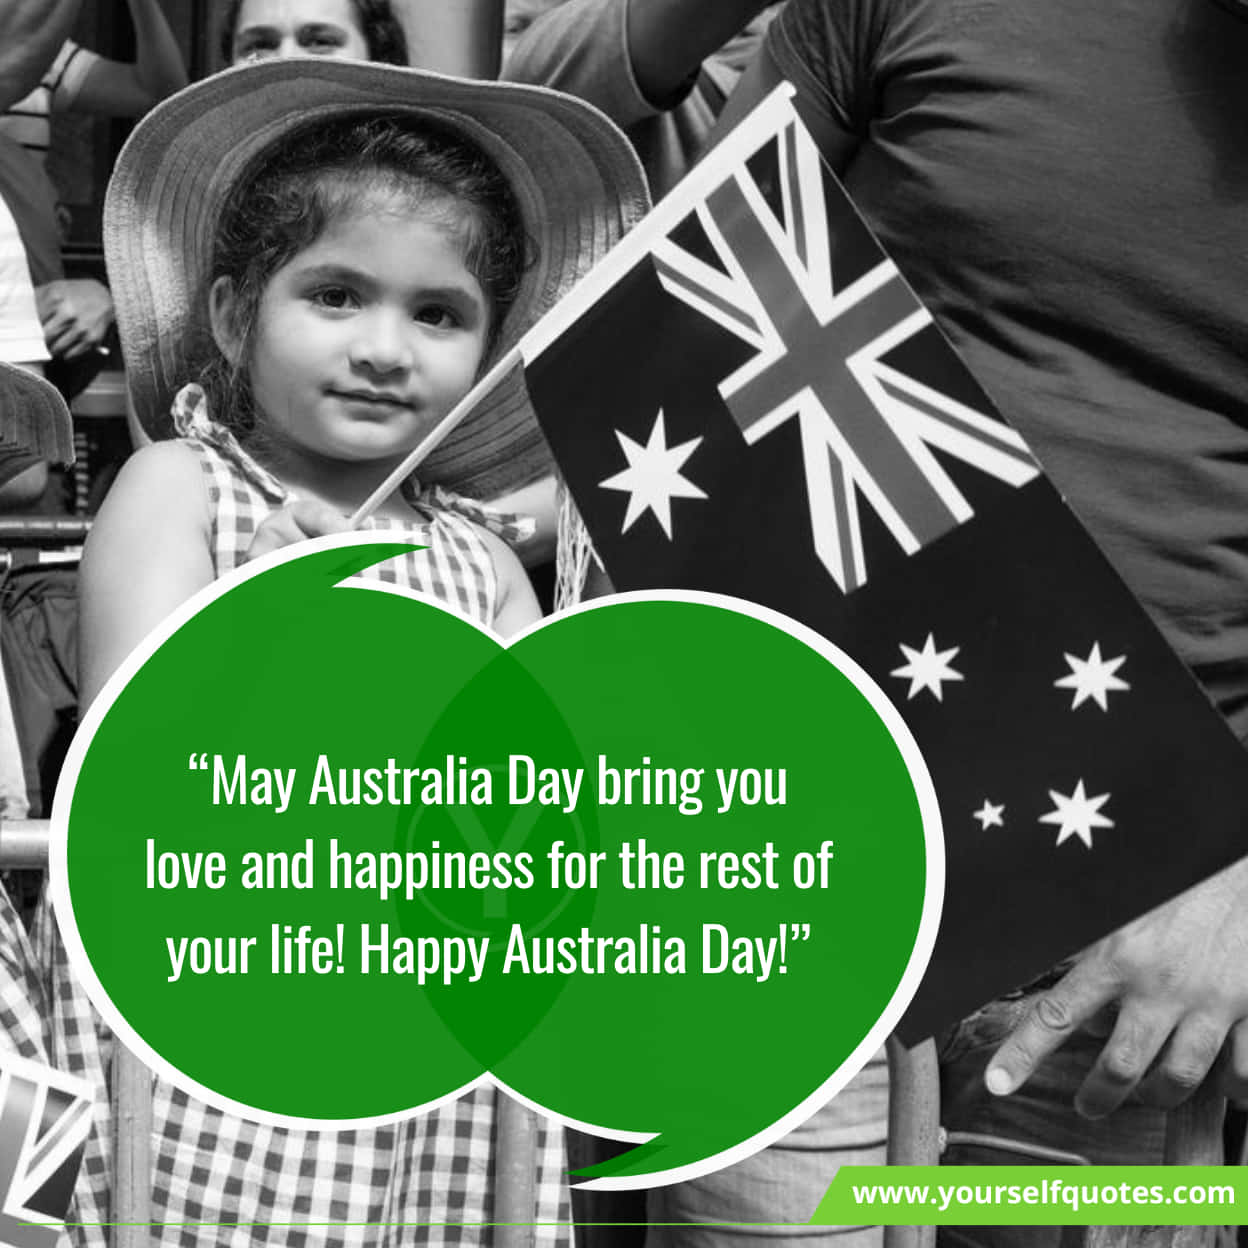 Inspirational Australia Day Wishes & Messages